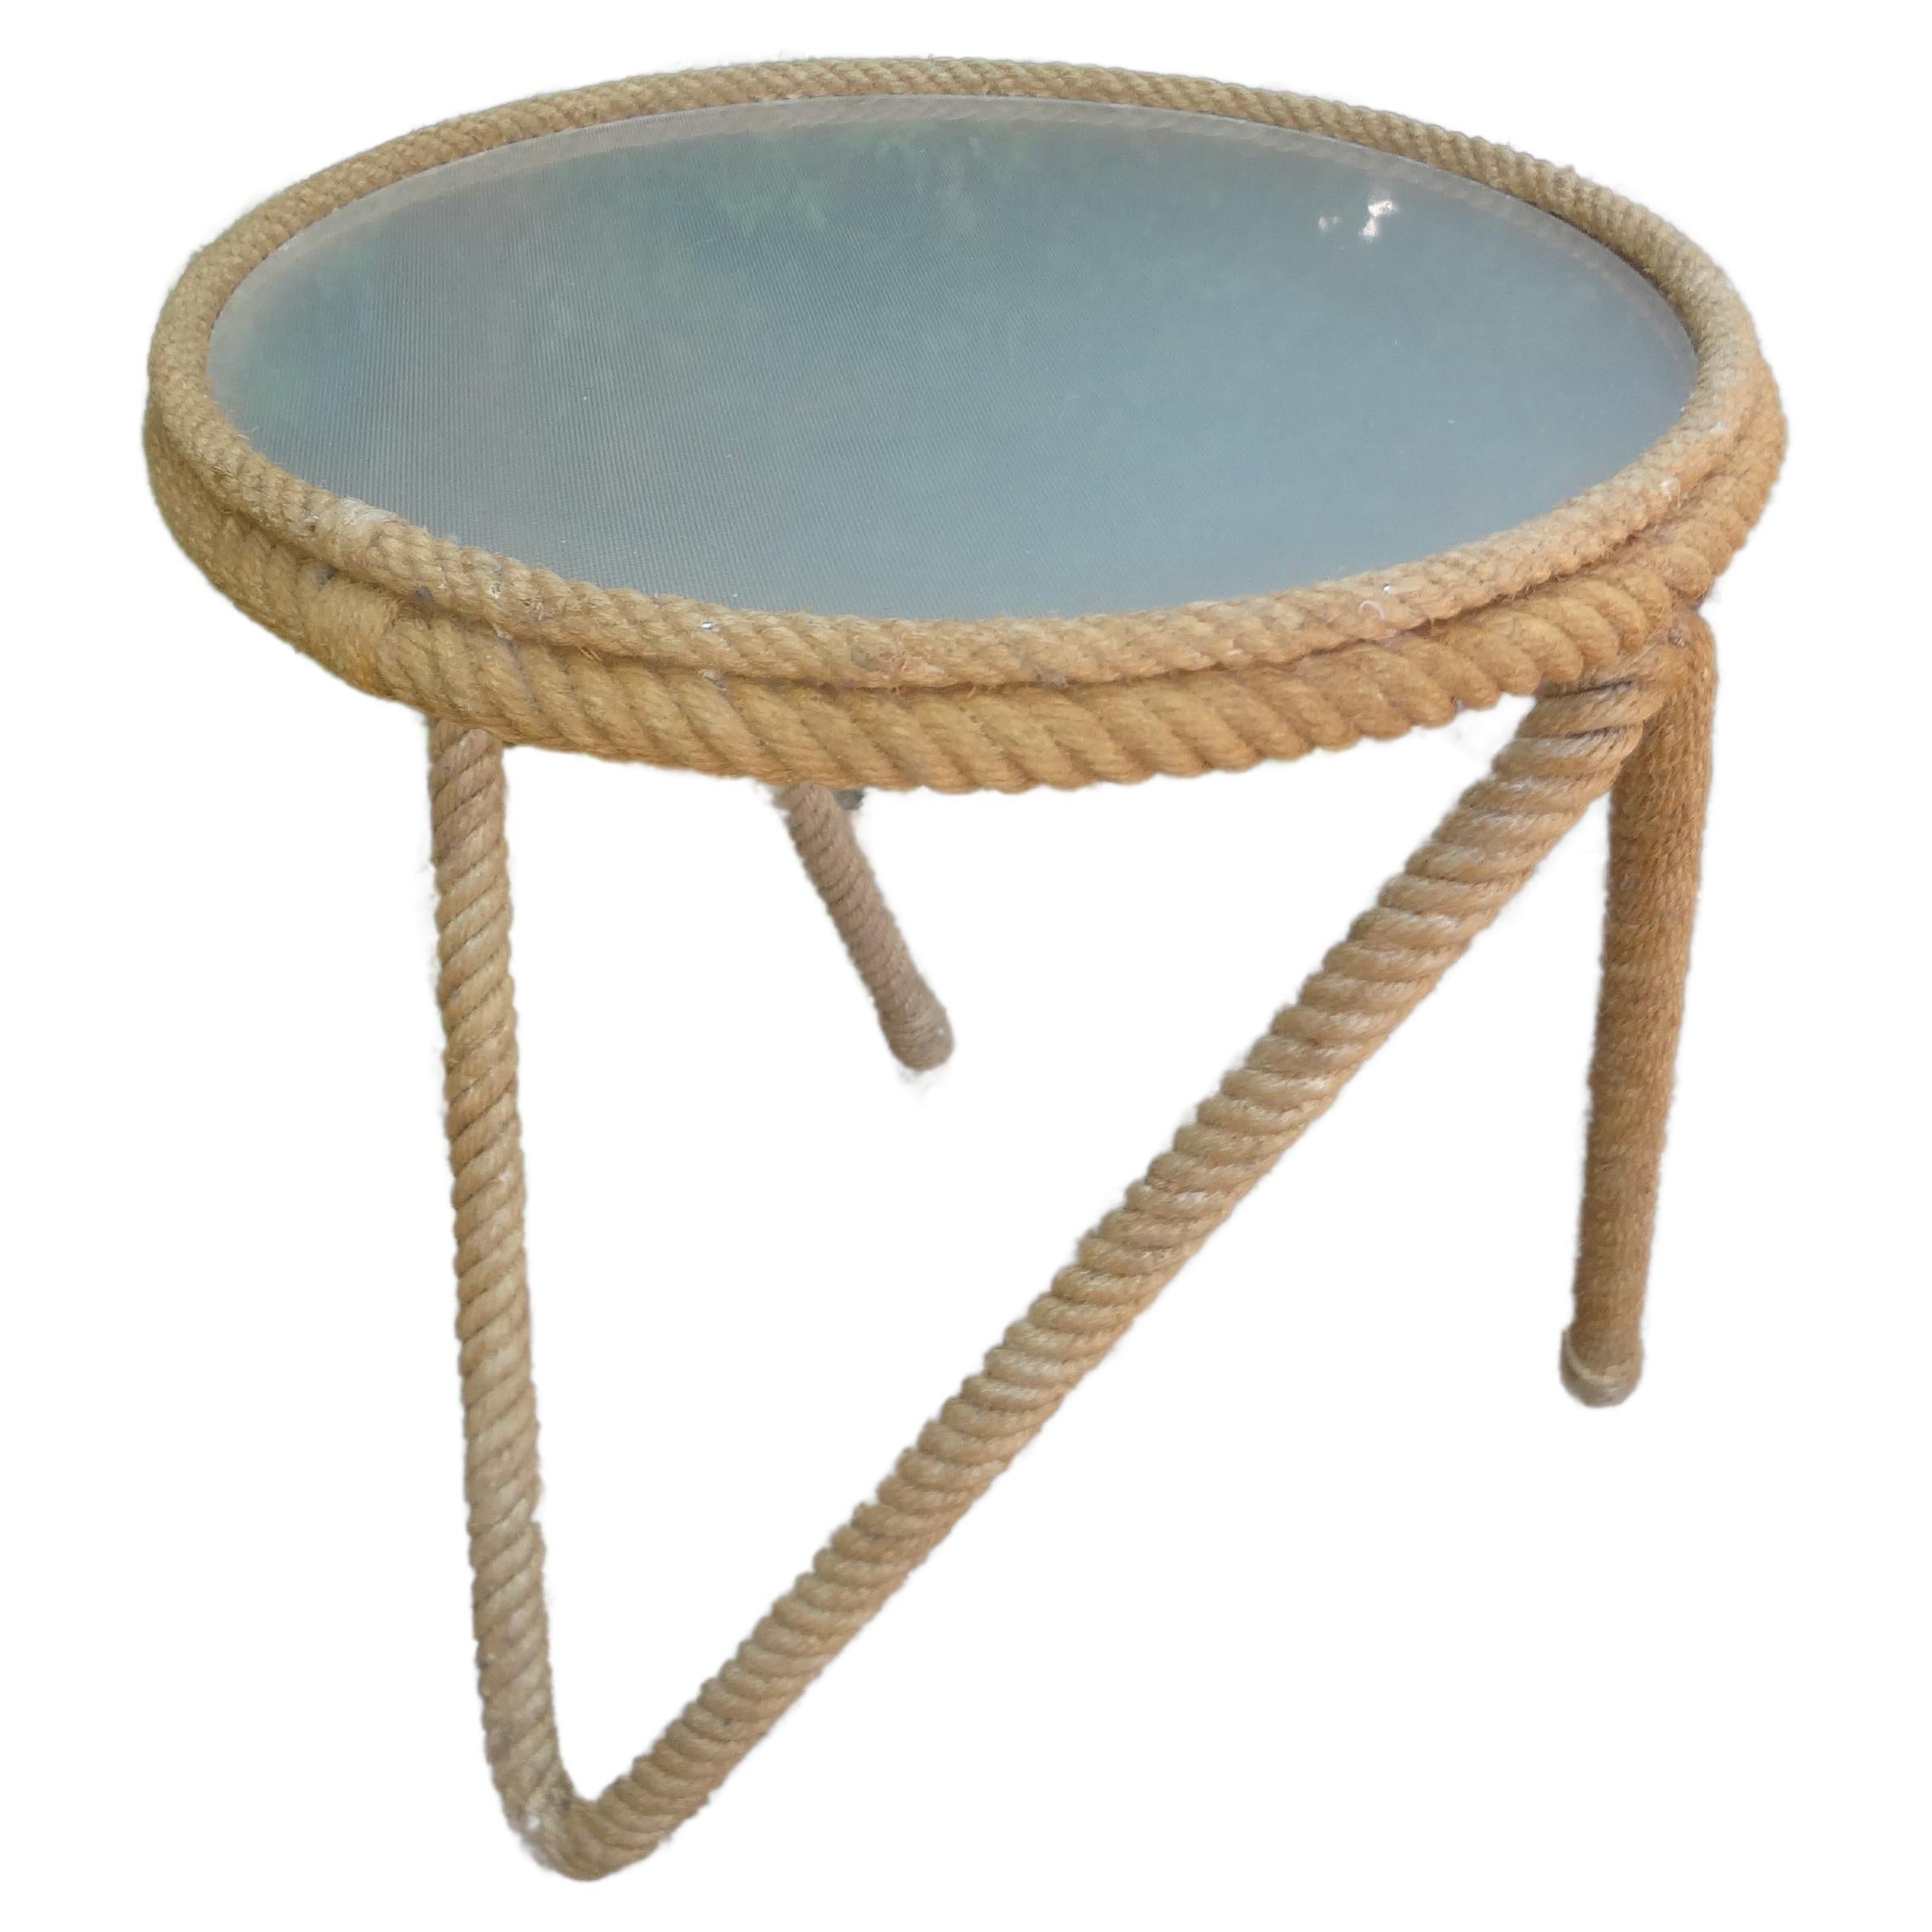 French Audoux & Minet Rope And Glass Table.
This handsome French rope table or gueridon by Adrien Audoux And Frida Minet was realized in the 1950's with the most unusual design featuring three legs and a frosted glass top. Our rare Audoux & Minet